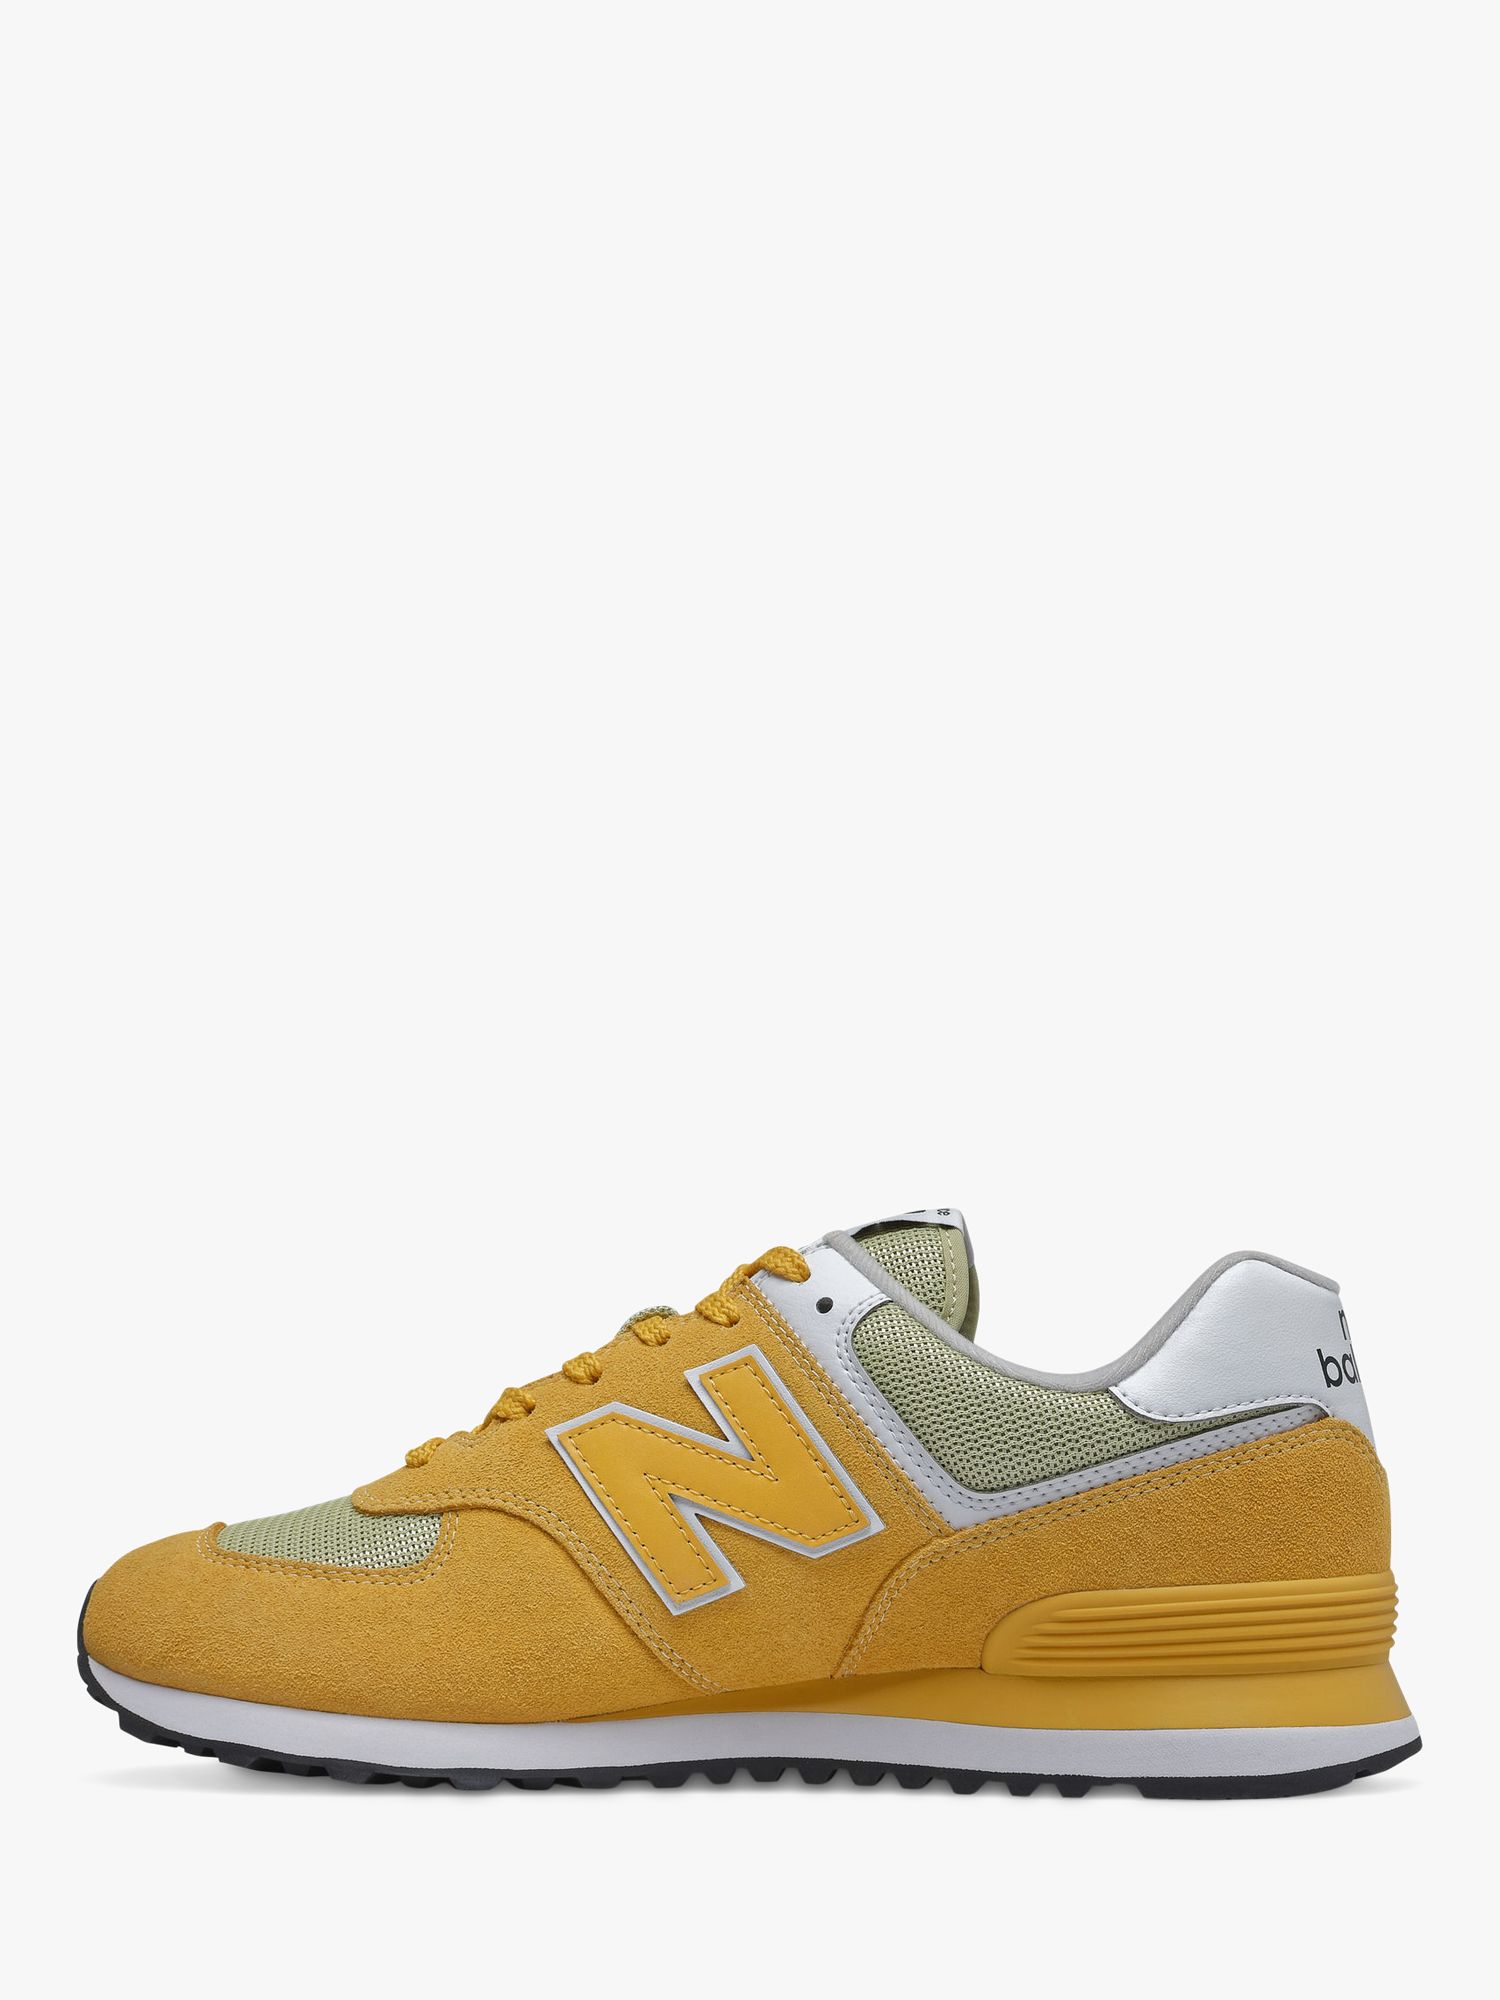 New Balance 574 Suede Trainers, Aspen/White at John Lewis & Partners